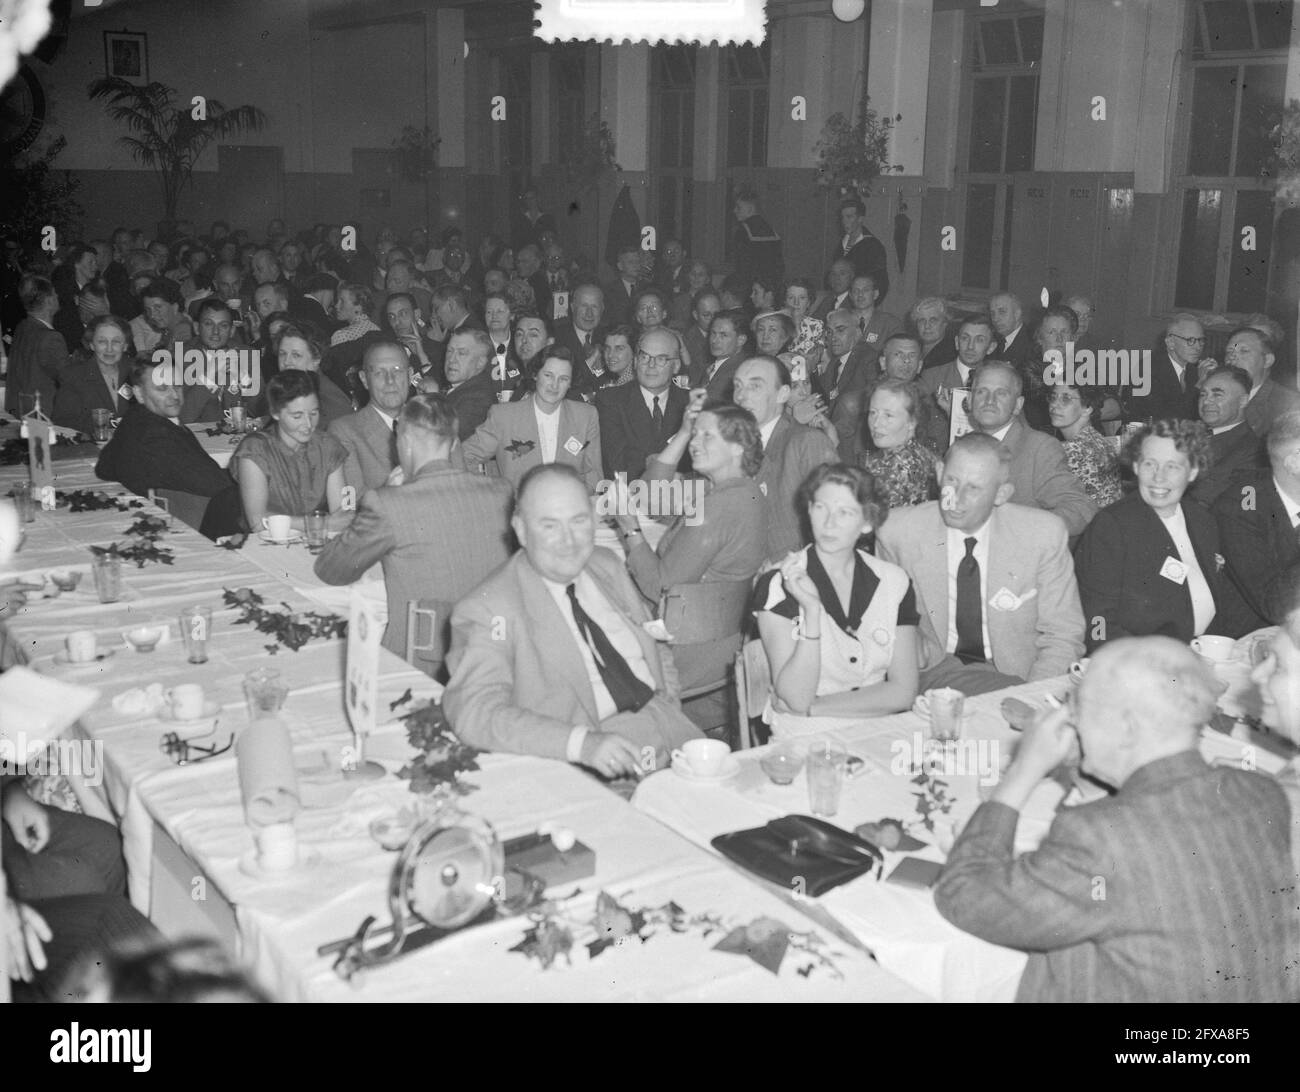 Dinner Rotary club NOC Voorschoten, 21 June 1952, dinner, The Netherlands, 20th century press agency photo, news to remember, documentary, historic photography 1945-1990, visual stories, human history of the Twentieth Century, capturing moments in time Stock Photo